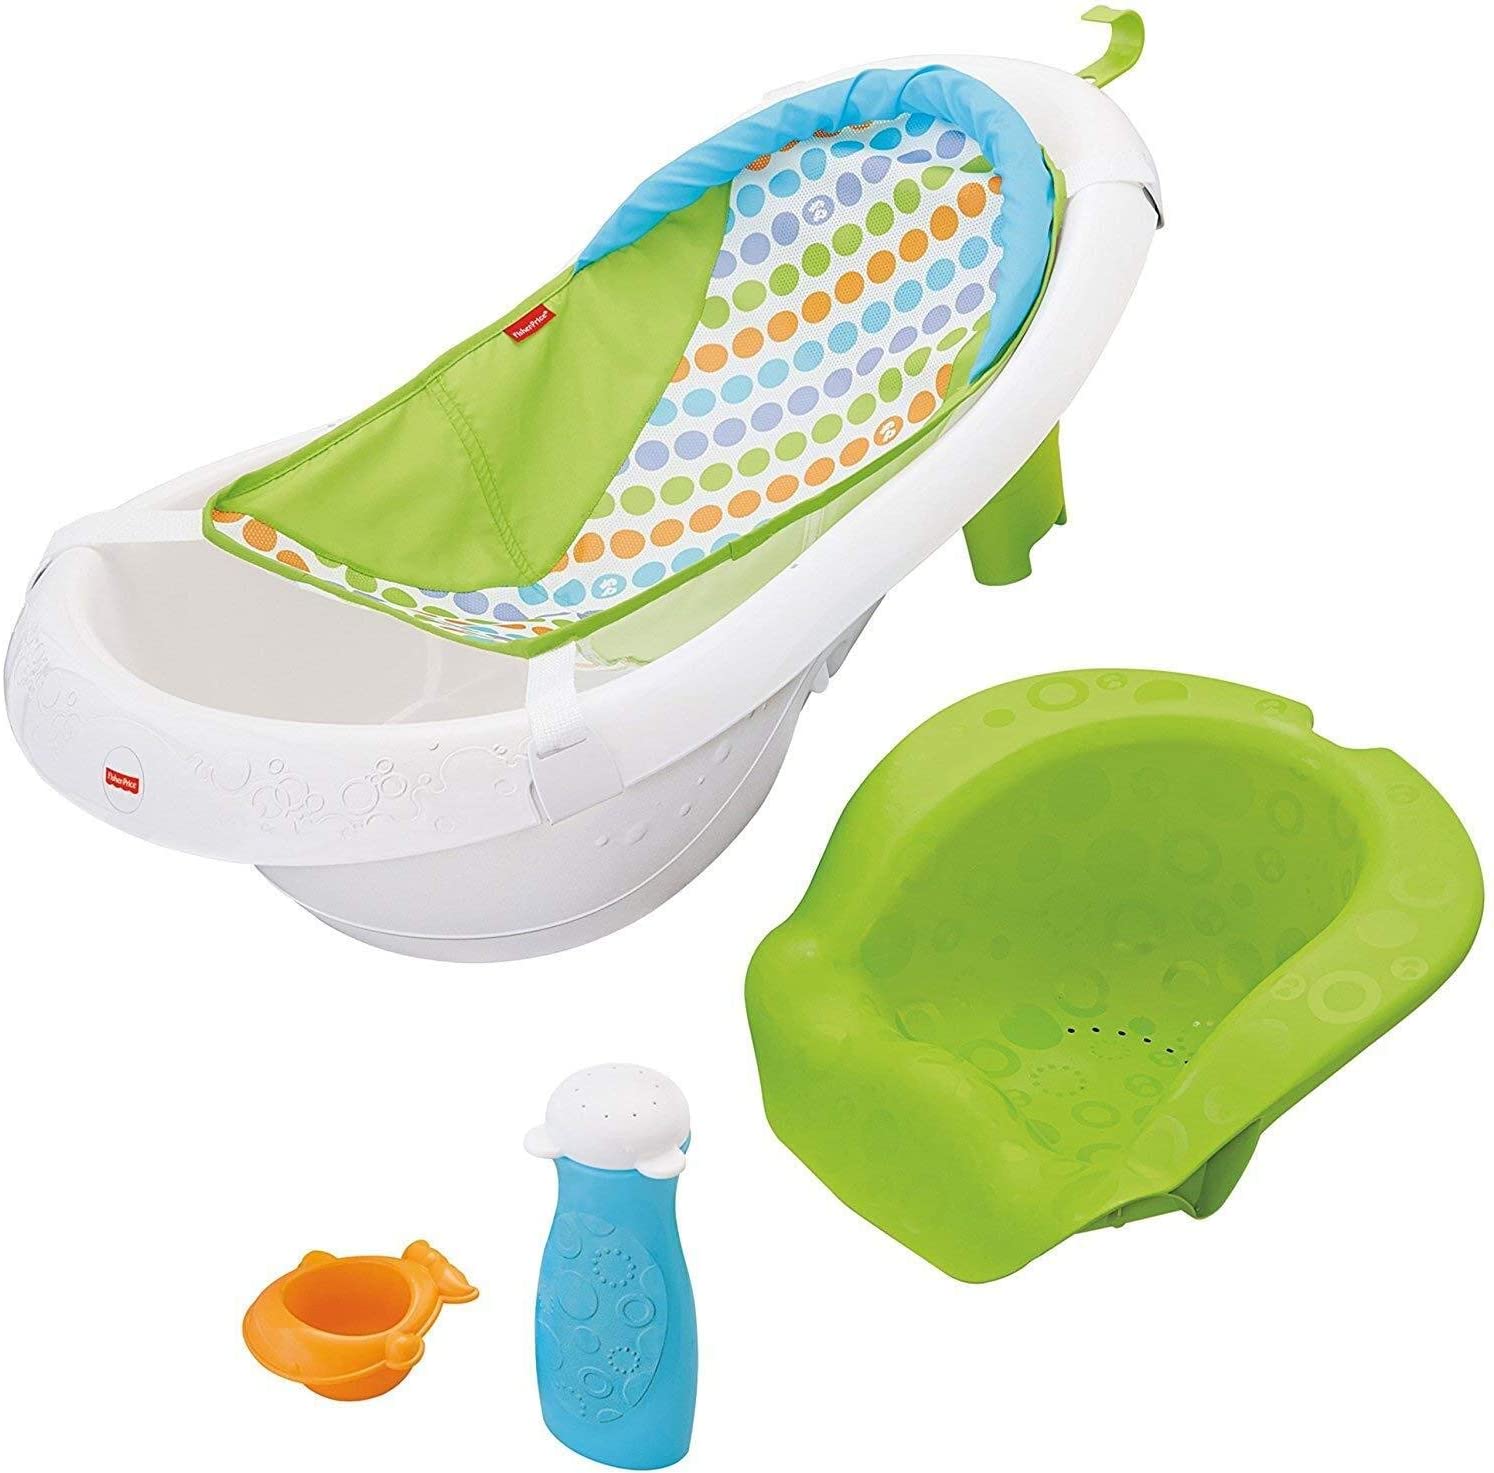 Fisher-Price 4-in-1 Sling ‘n Seat Tub, Multicolor